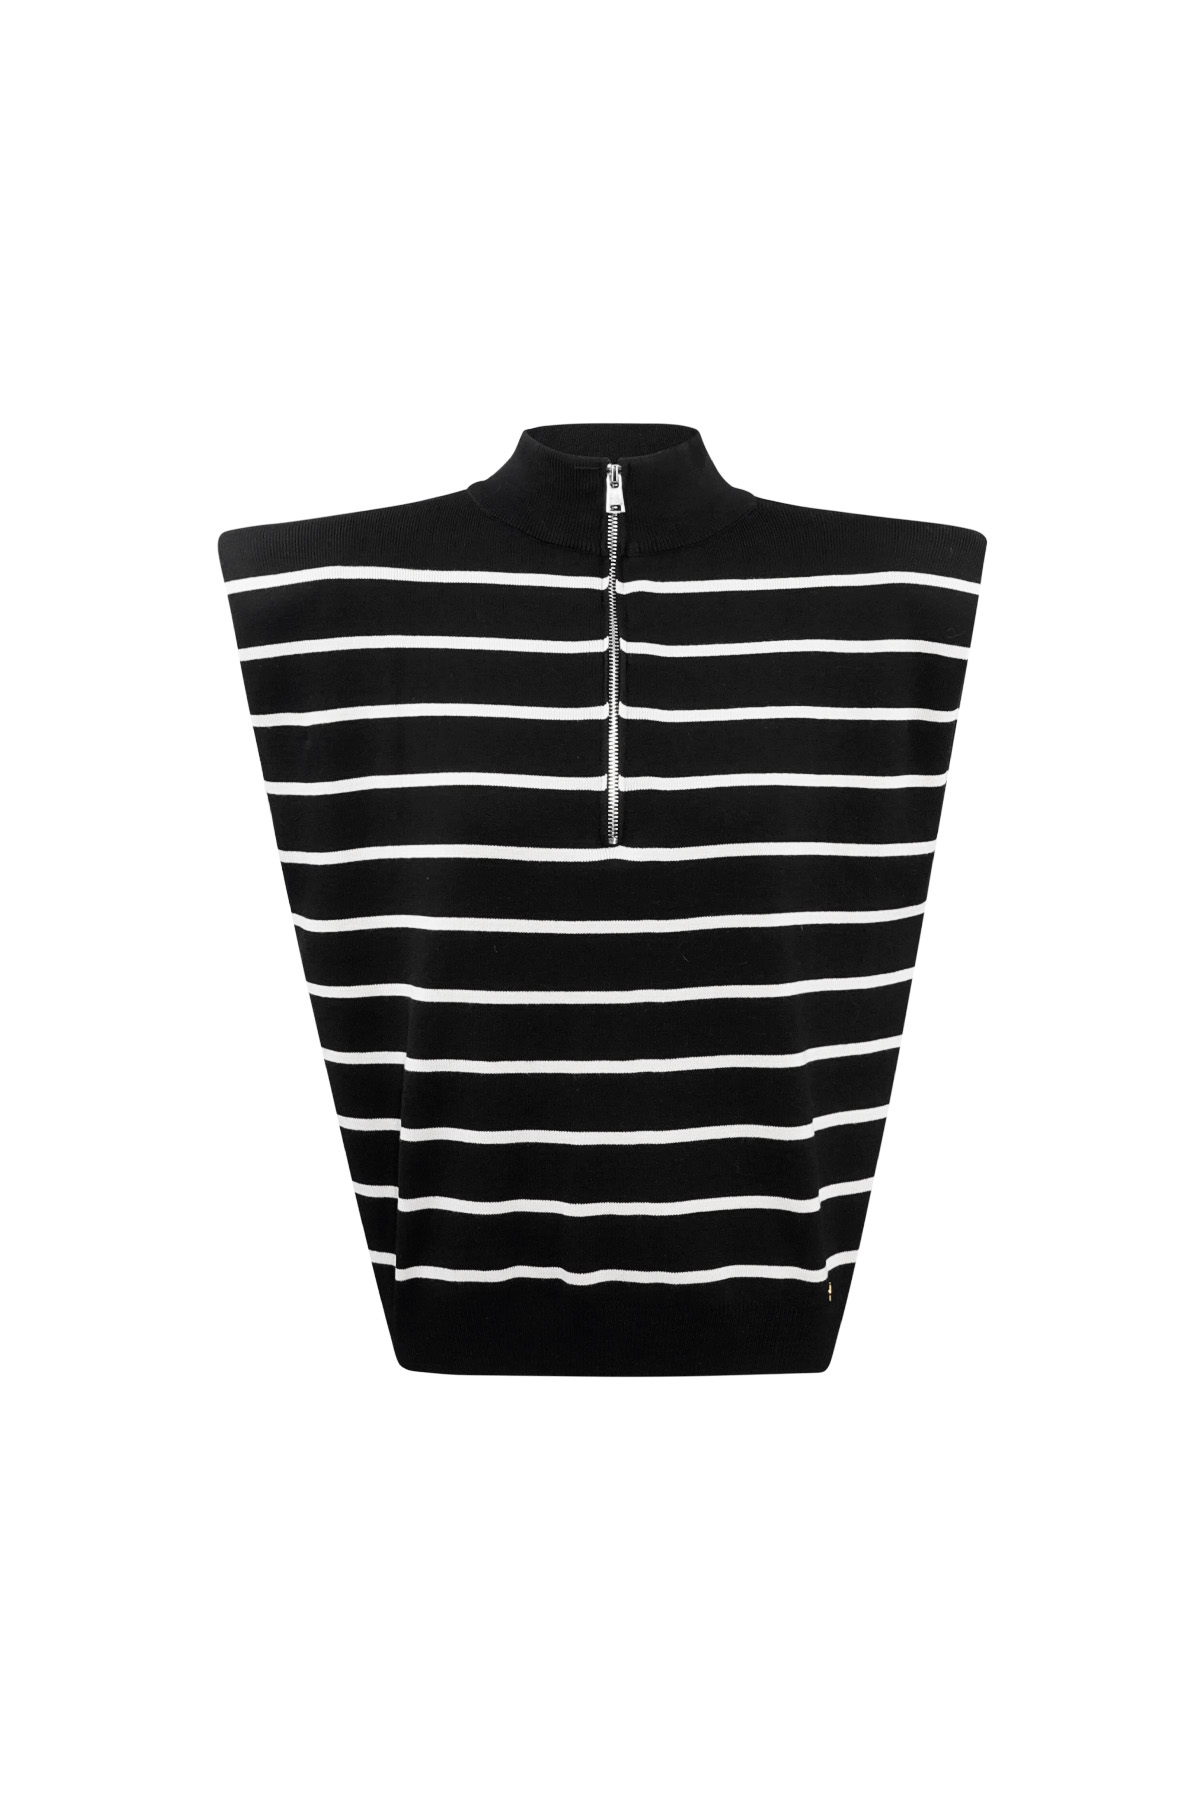 Striped spencer with zipper - black and white